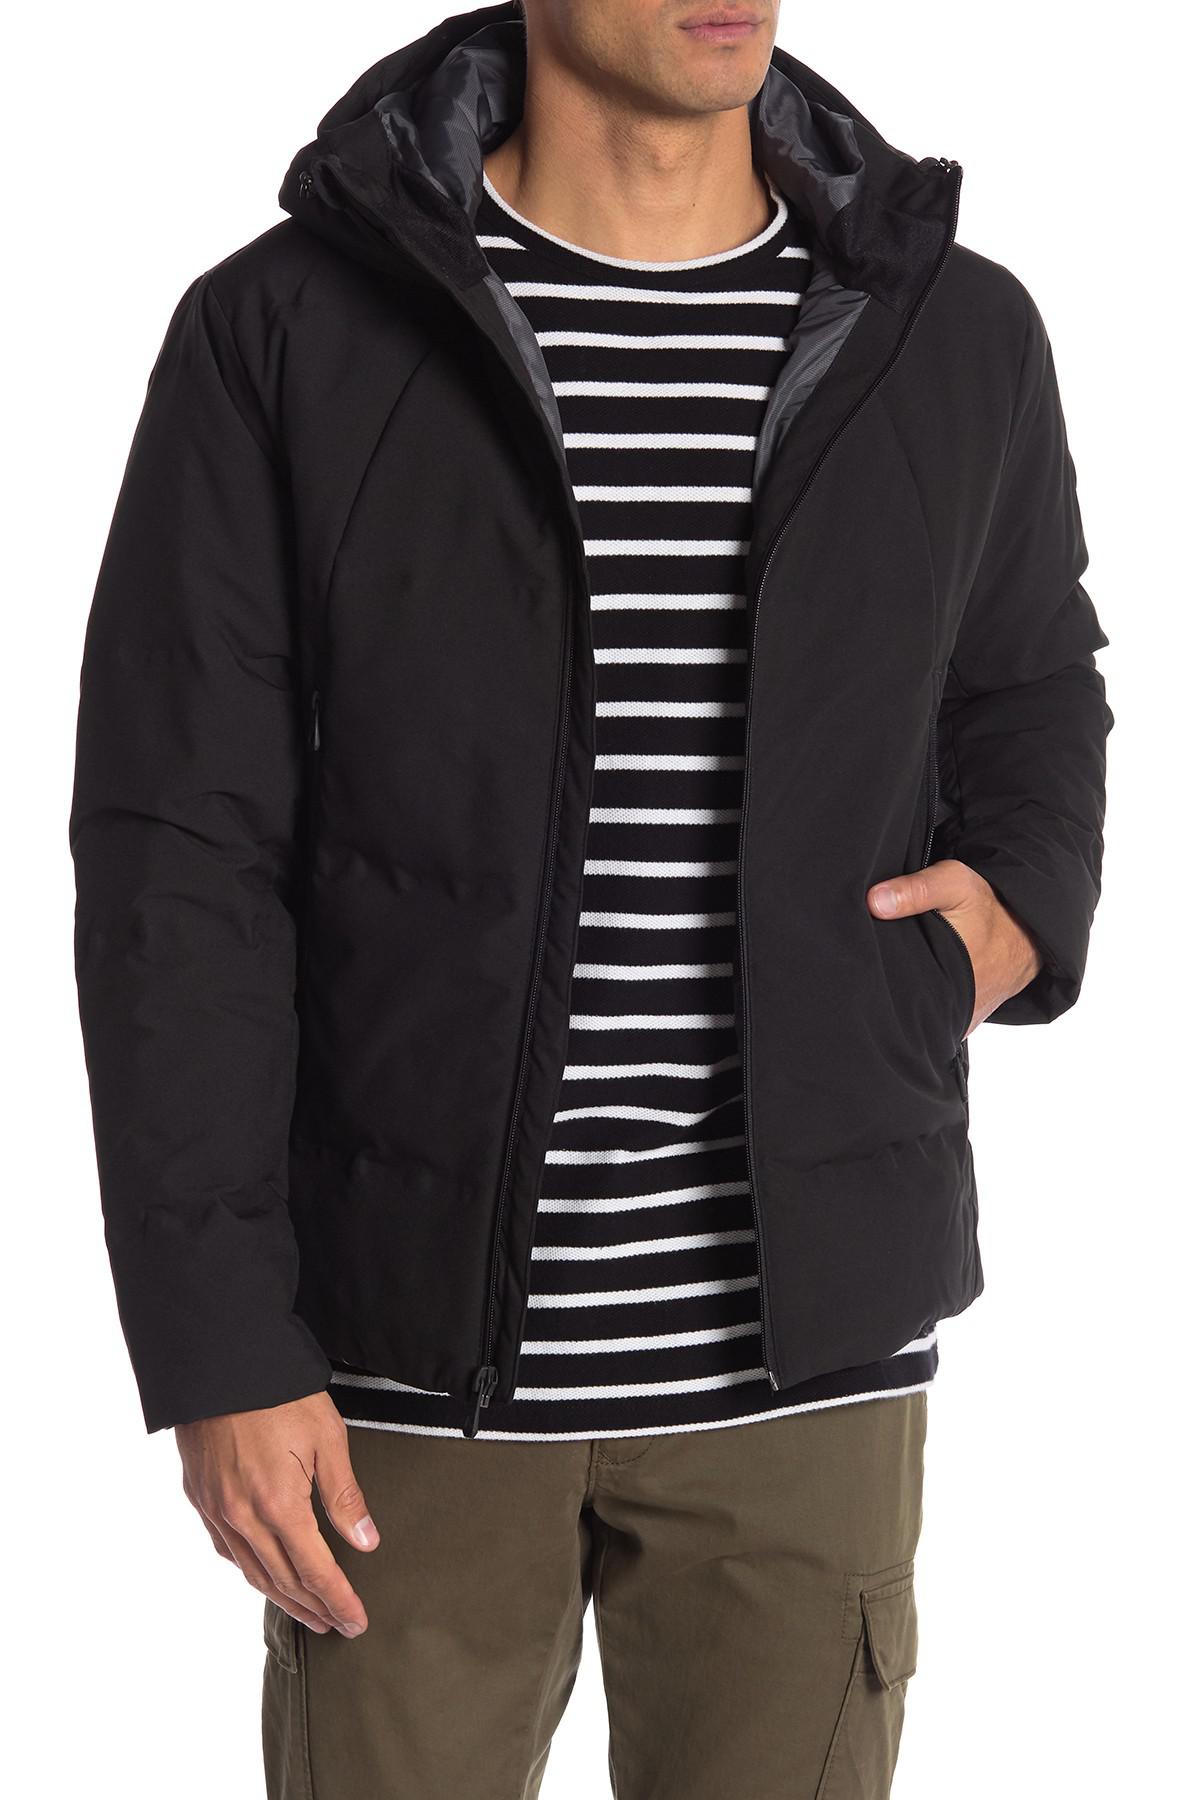 Lyst - Hawke & Co. Hooded Heat Sealed Water Resistant Down Puffer ...